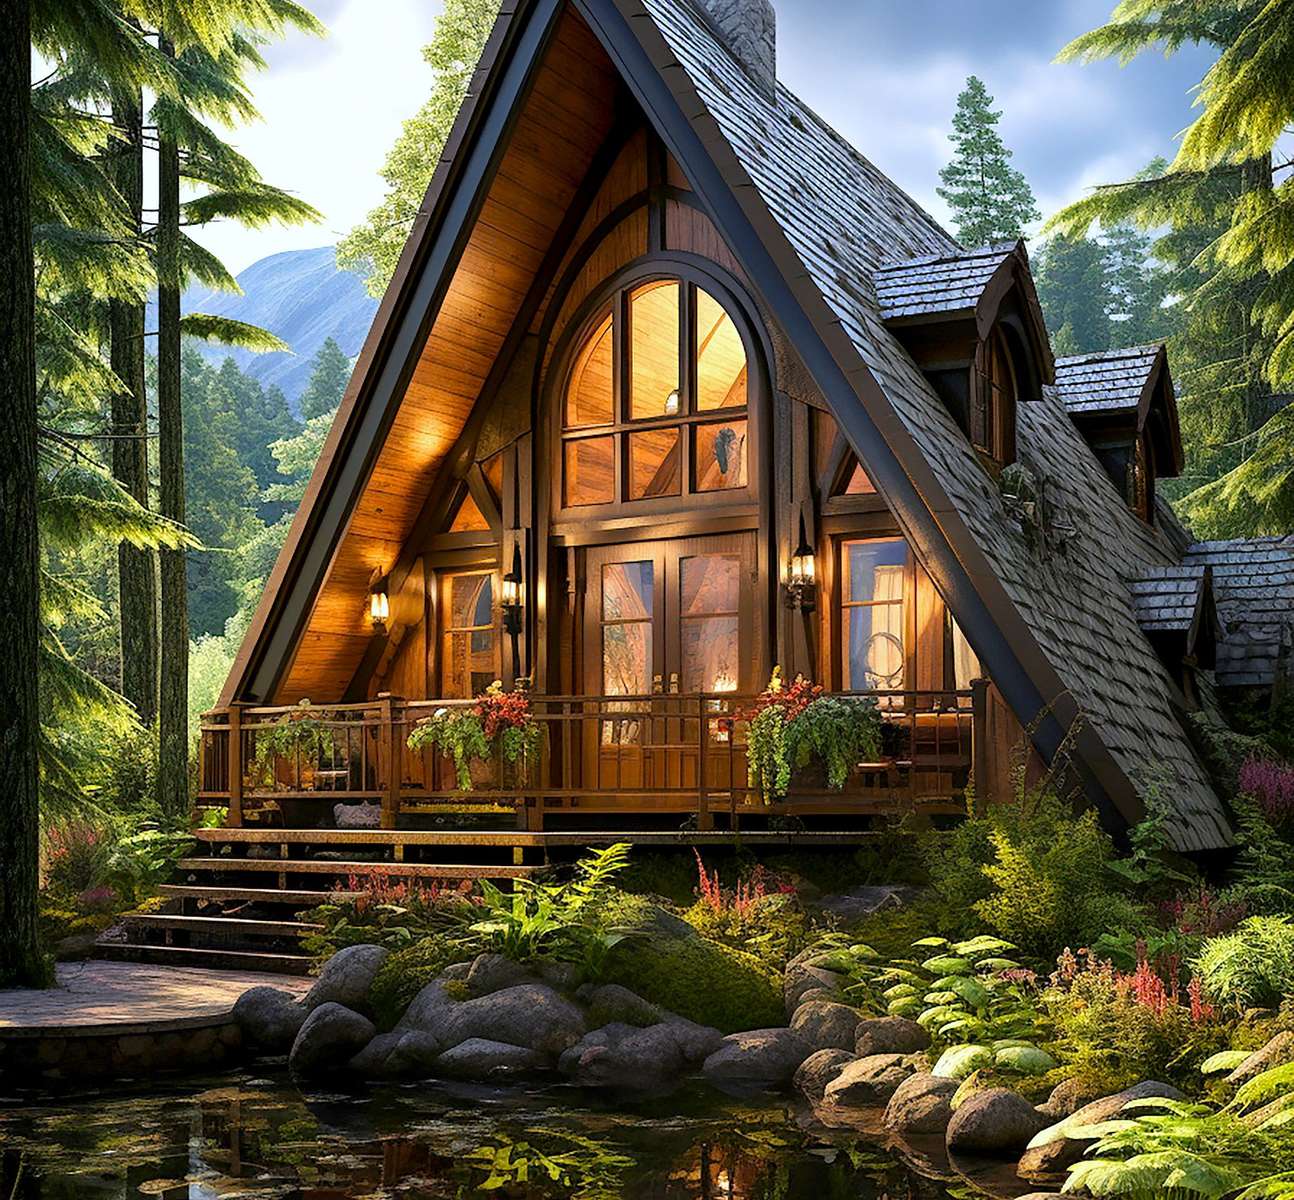 Holiday house by the pond online puzzle